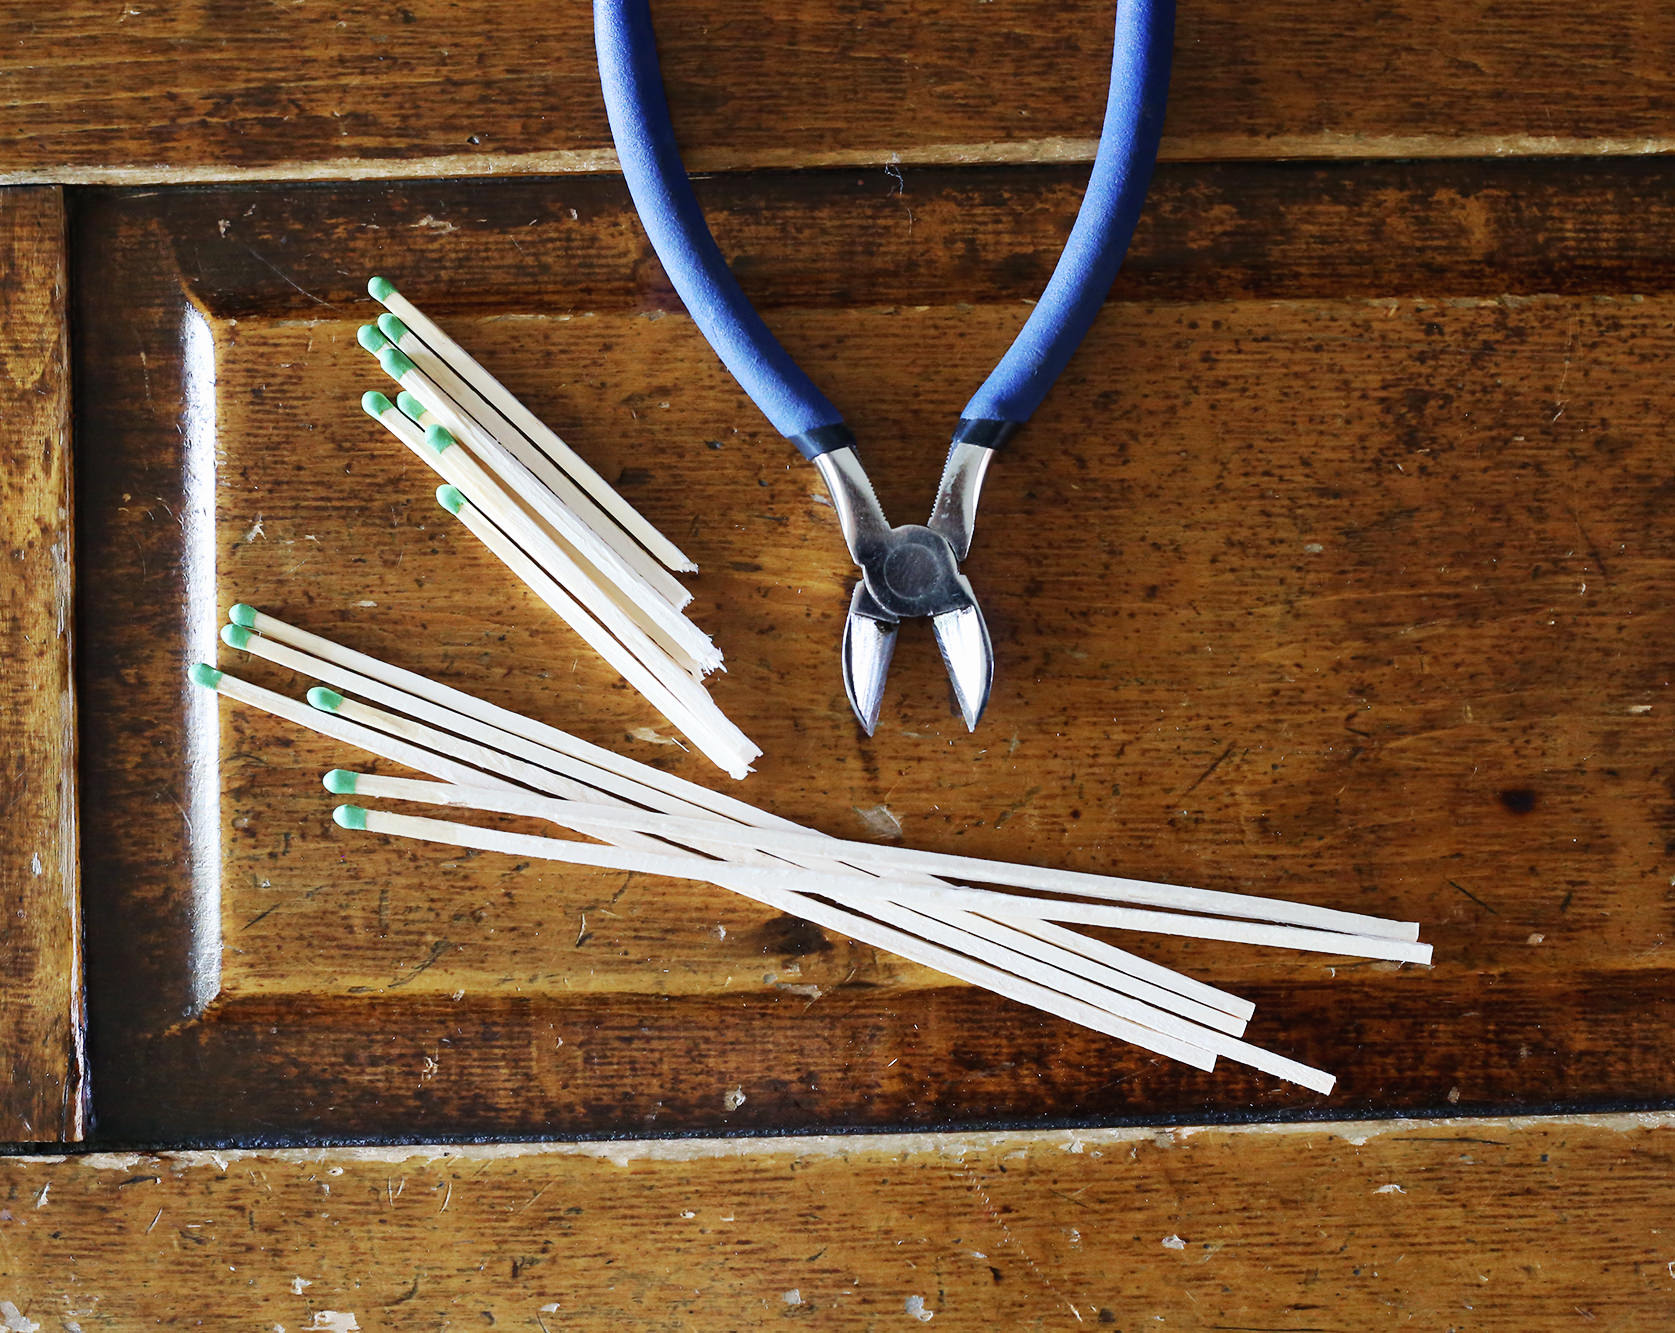 Make your own matchstick jar by cutting down those long outdoor matchsticks and displaying them in a glass jar! More tips on Lily & Val Living!